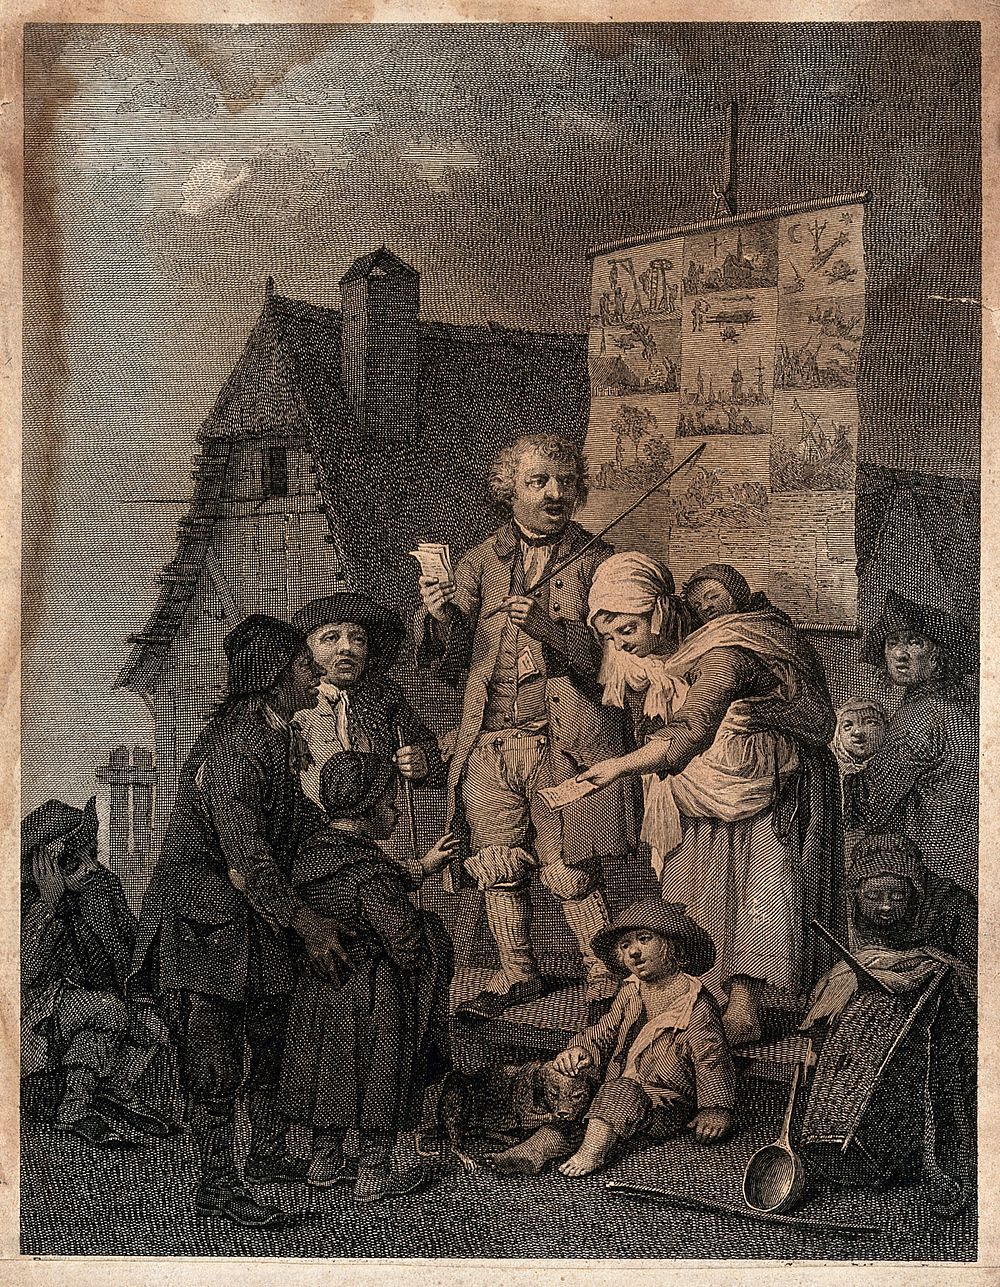 A man narrating his experiences in public, while his wife hands out leaflets. Etching.